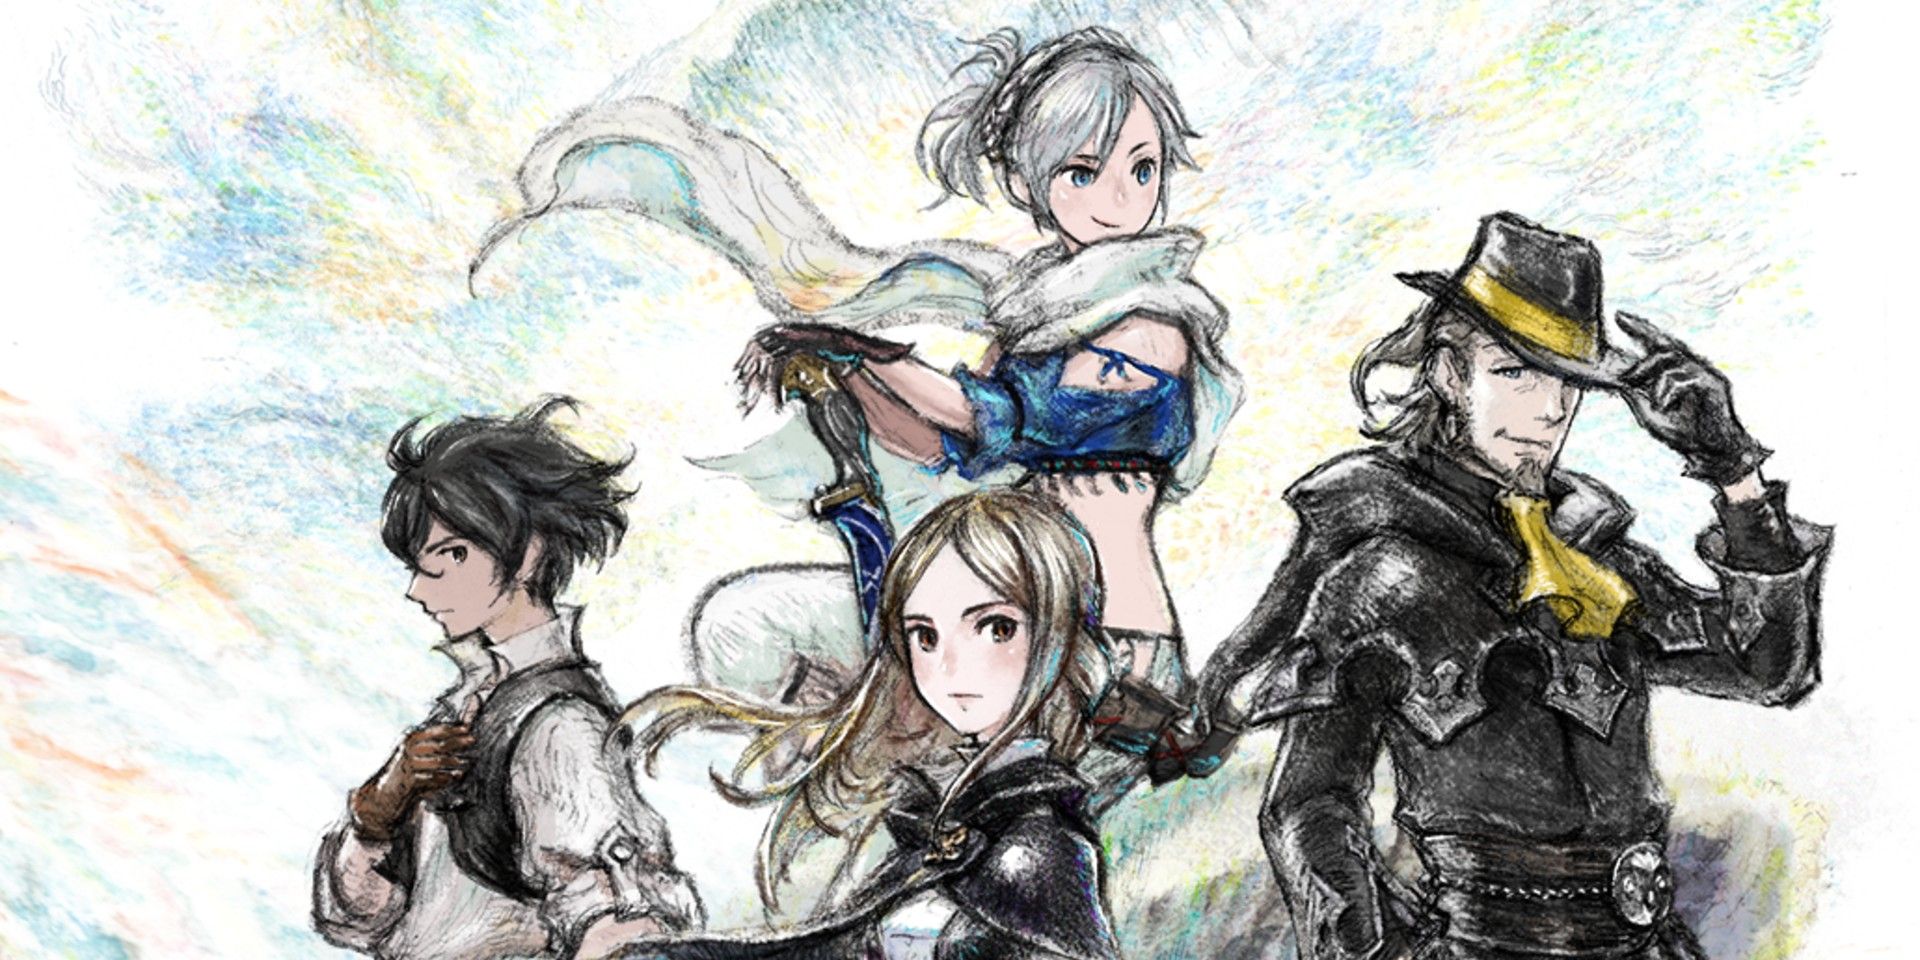 bravely default 2 release date